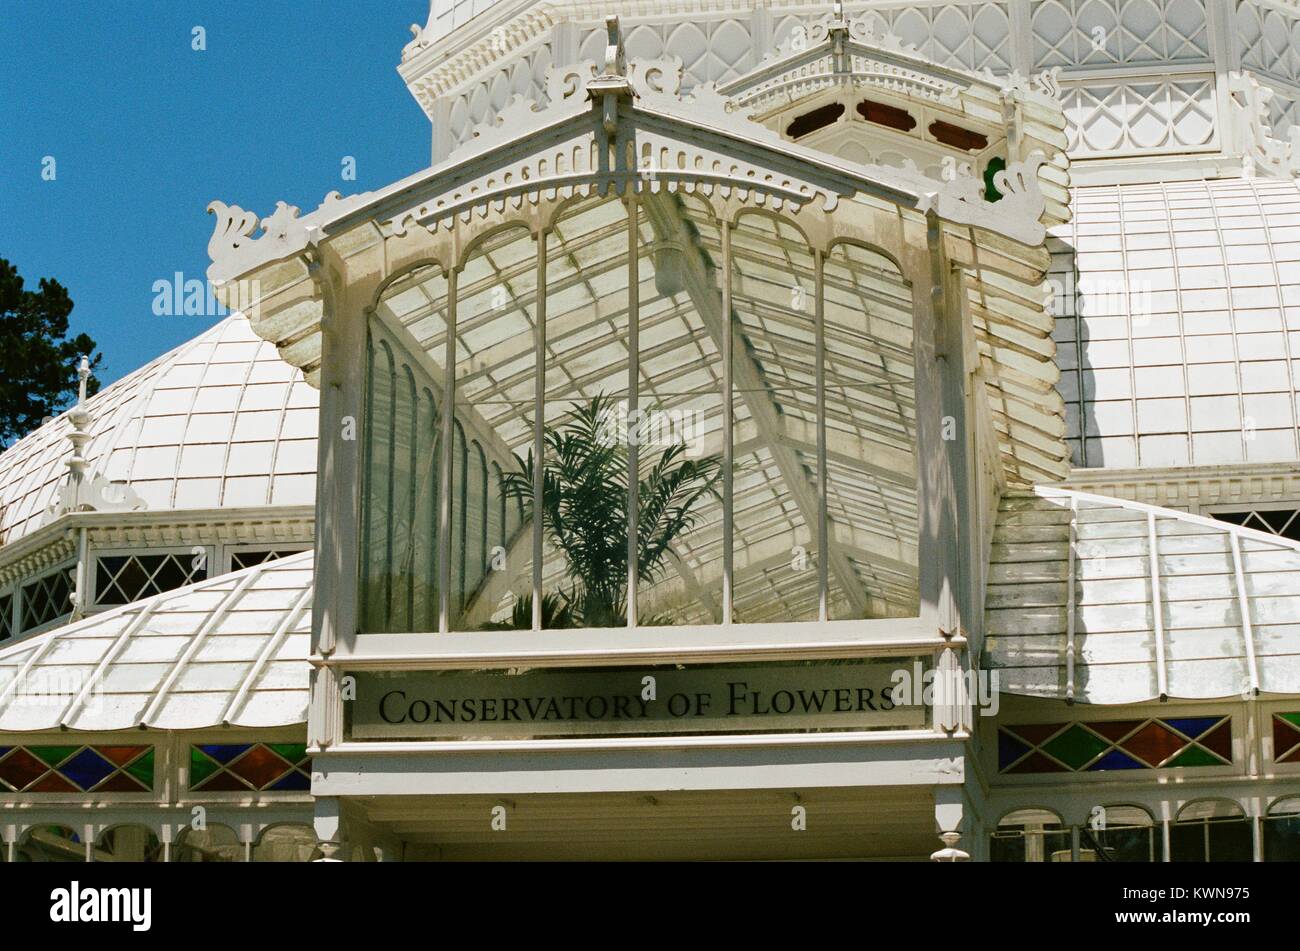 Closeup of the front entrance to the Conservatory of Flowers, a Victorian-era greenhouse and flower conservatory in Golden Gate Park, San Francisco, California, with stained glass and text reading Conservatory of Flowers, July 11, 2017. Stock Photo